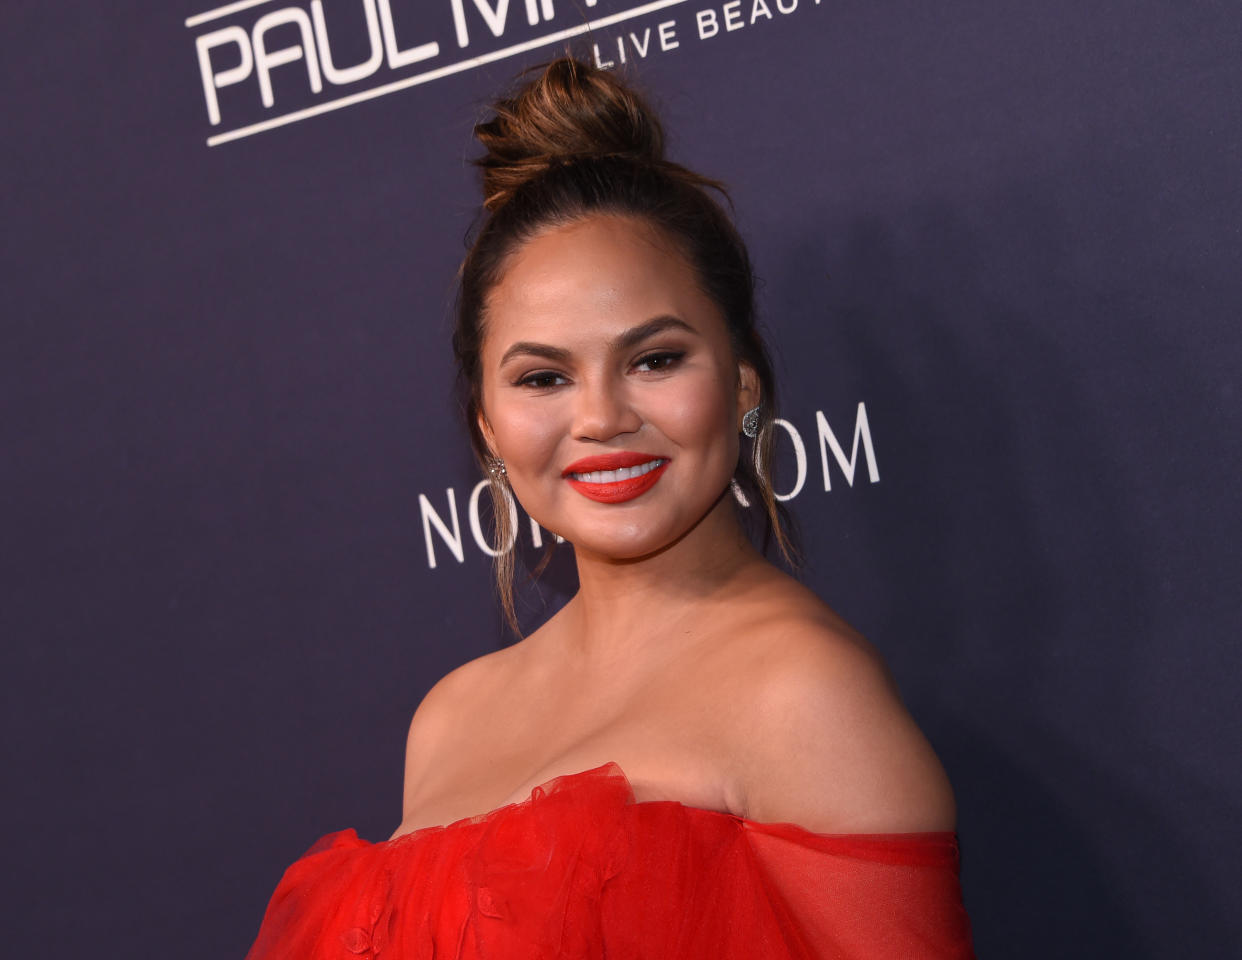 Chrissy Teigen’s hilarious baby bump selfie is relatable for anyone who’s ever kept a pregnancy secret